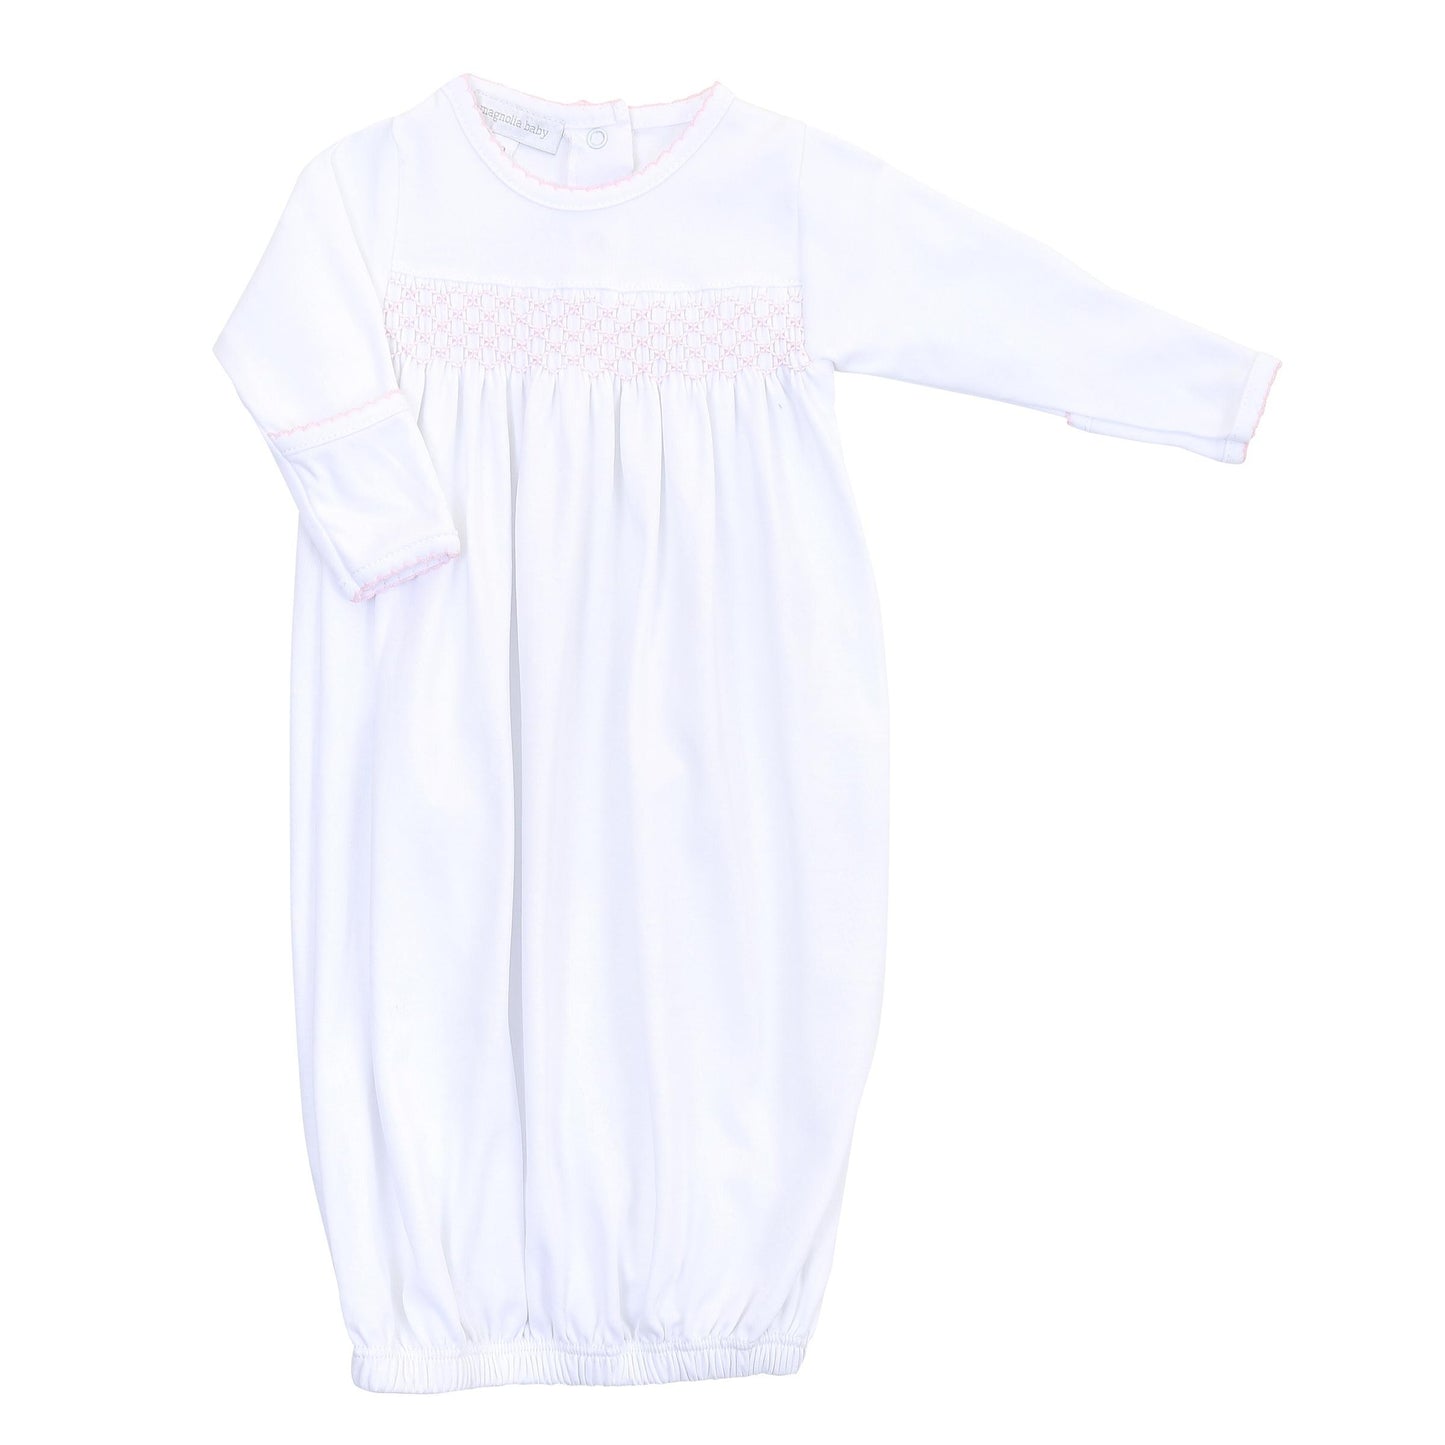 Classic Smocked Gown - Pink/Blue/White Smock